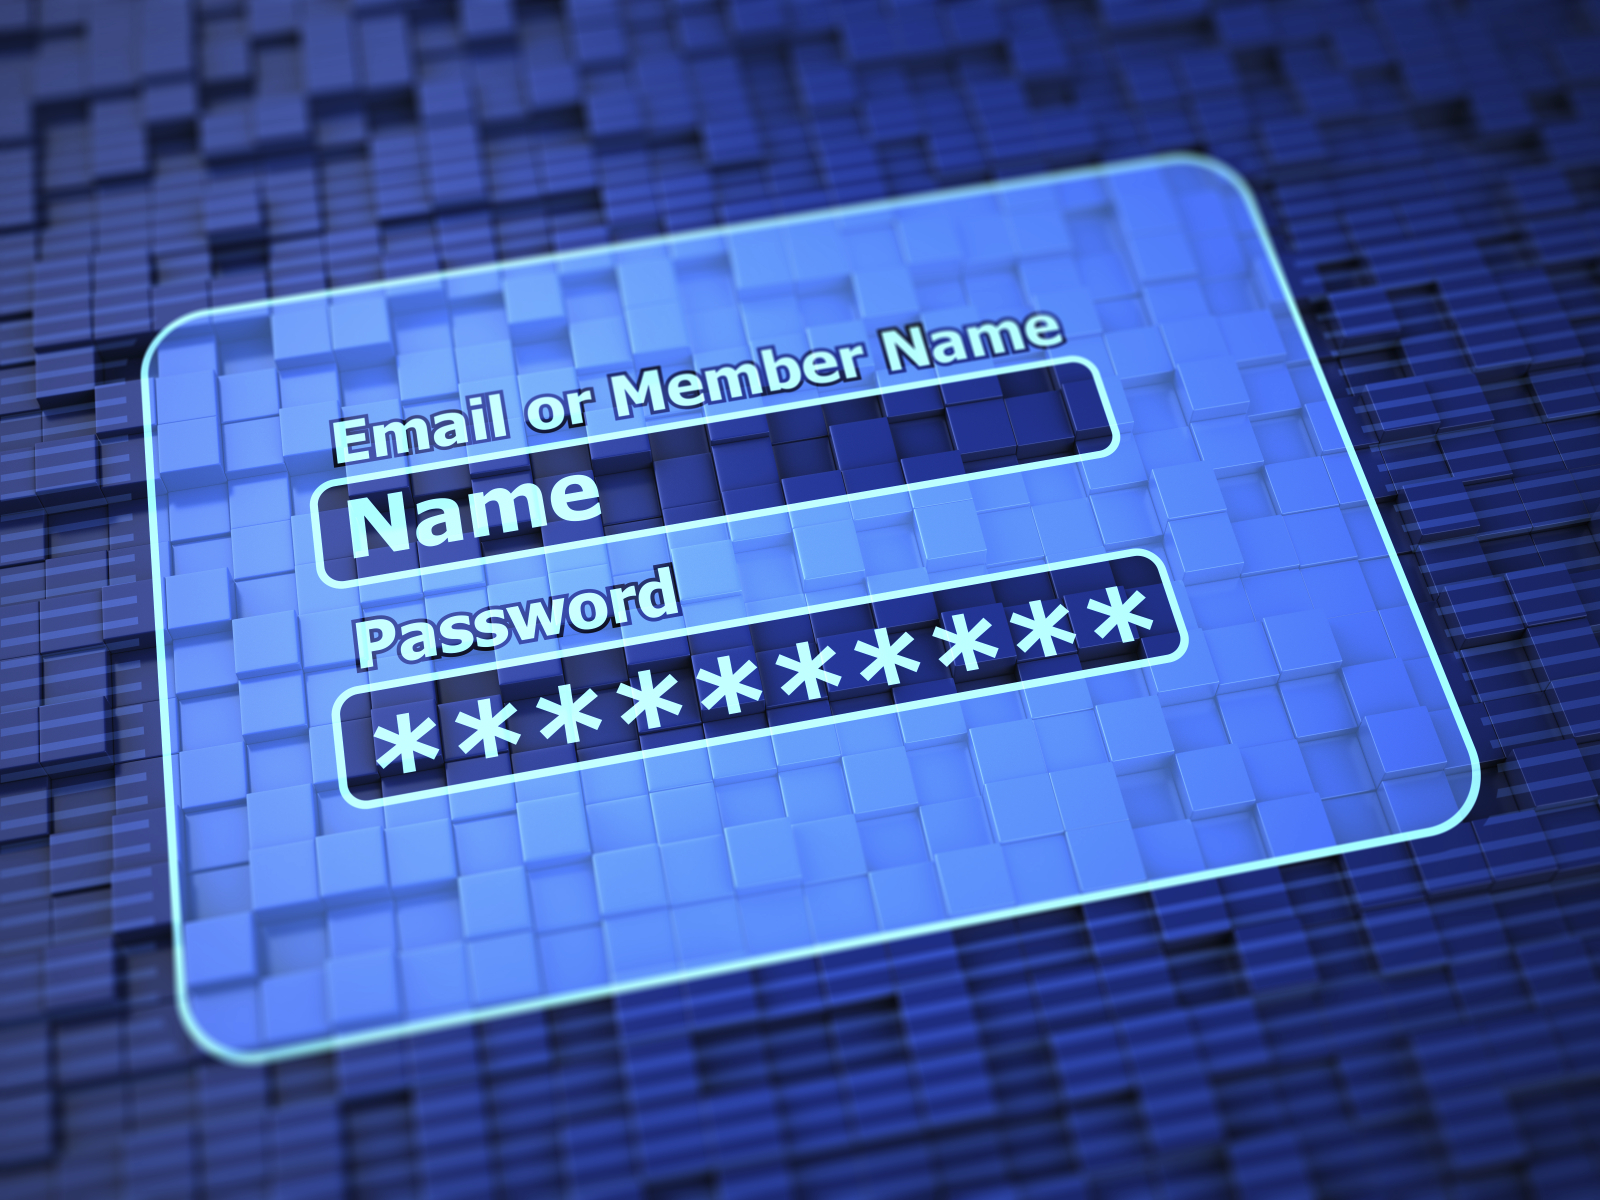 How a Fake Password Project Could Make Cybercriminals